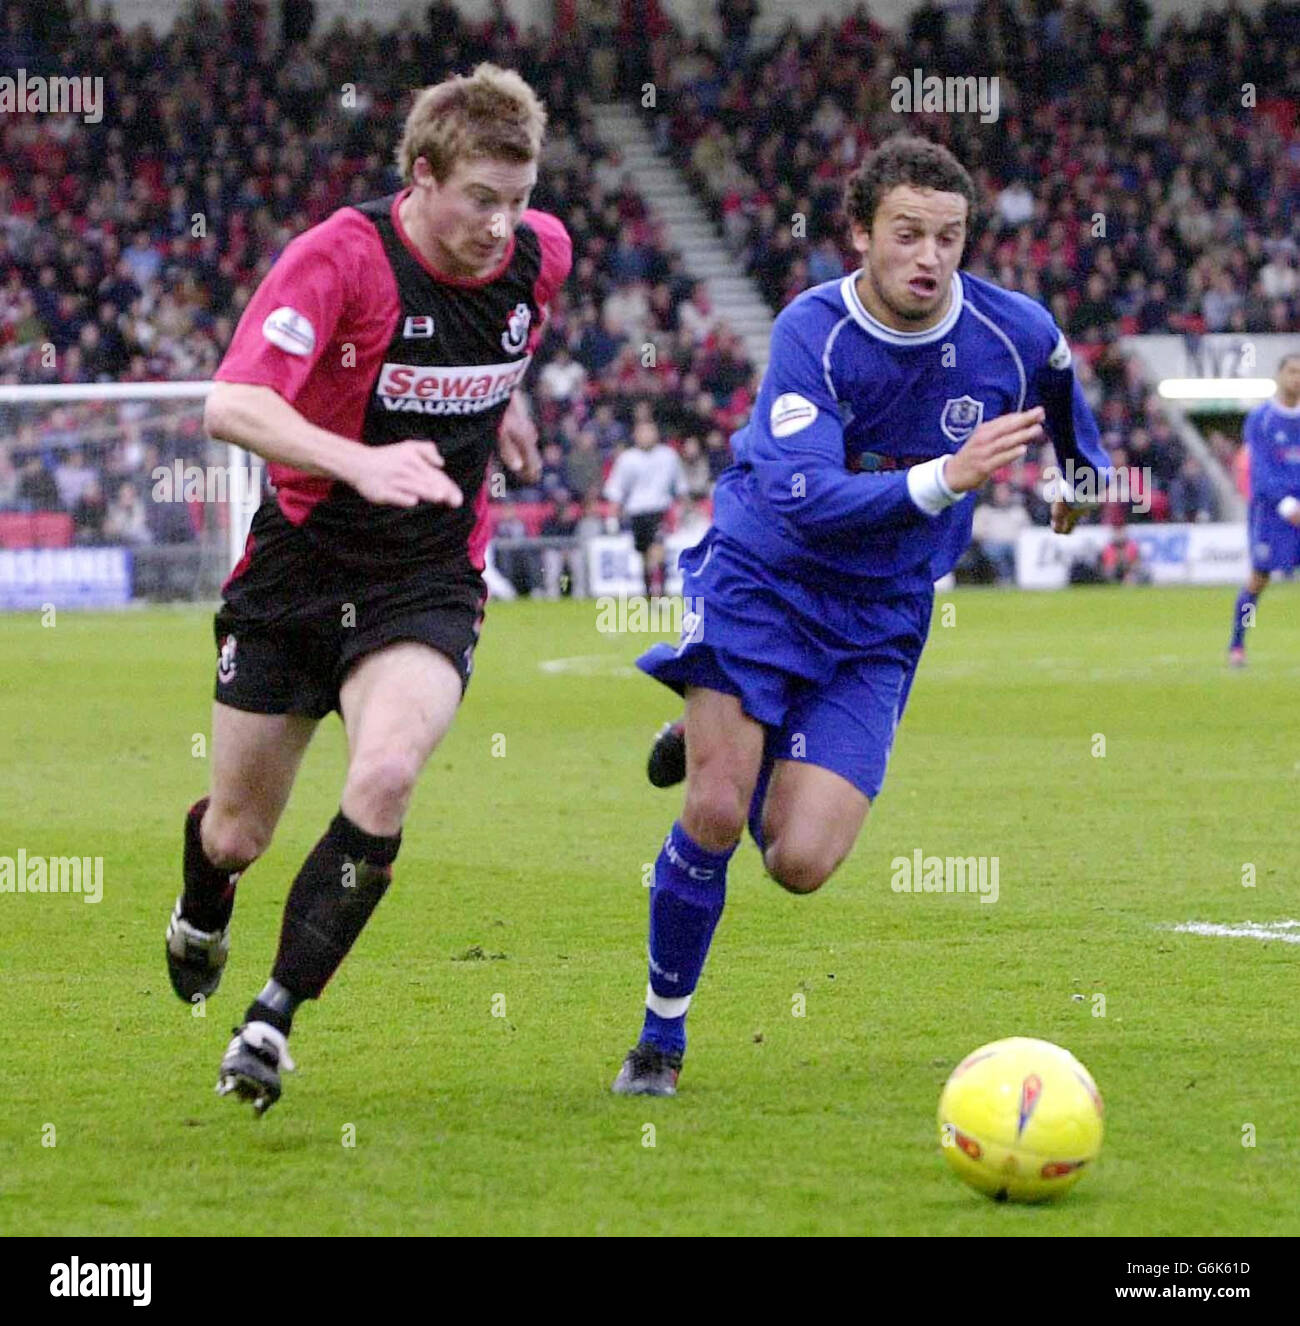 Bournemouth's Warren Cummings (left) chases Gareth Jellyman of Peterborough, during the Nationwide Division Two match at the Dean Court Stadium, Bournemouth, ONLY BE USED WITHIN THE CONTEXT OF AN EDITORIAL FEATURE. NO UNOFFICIAL CLUB WEBSITE USE. Stock Photo